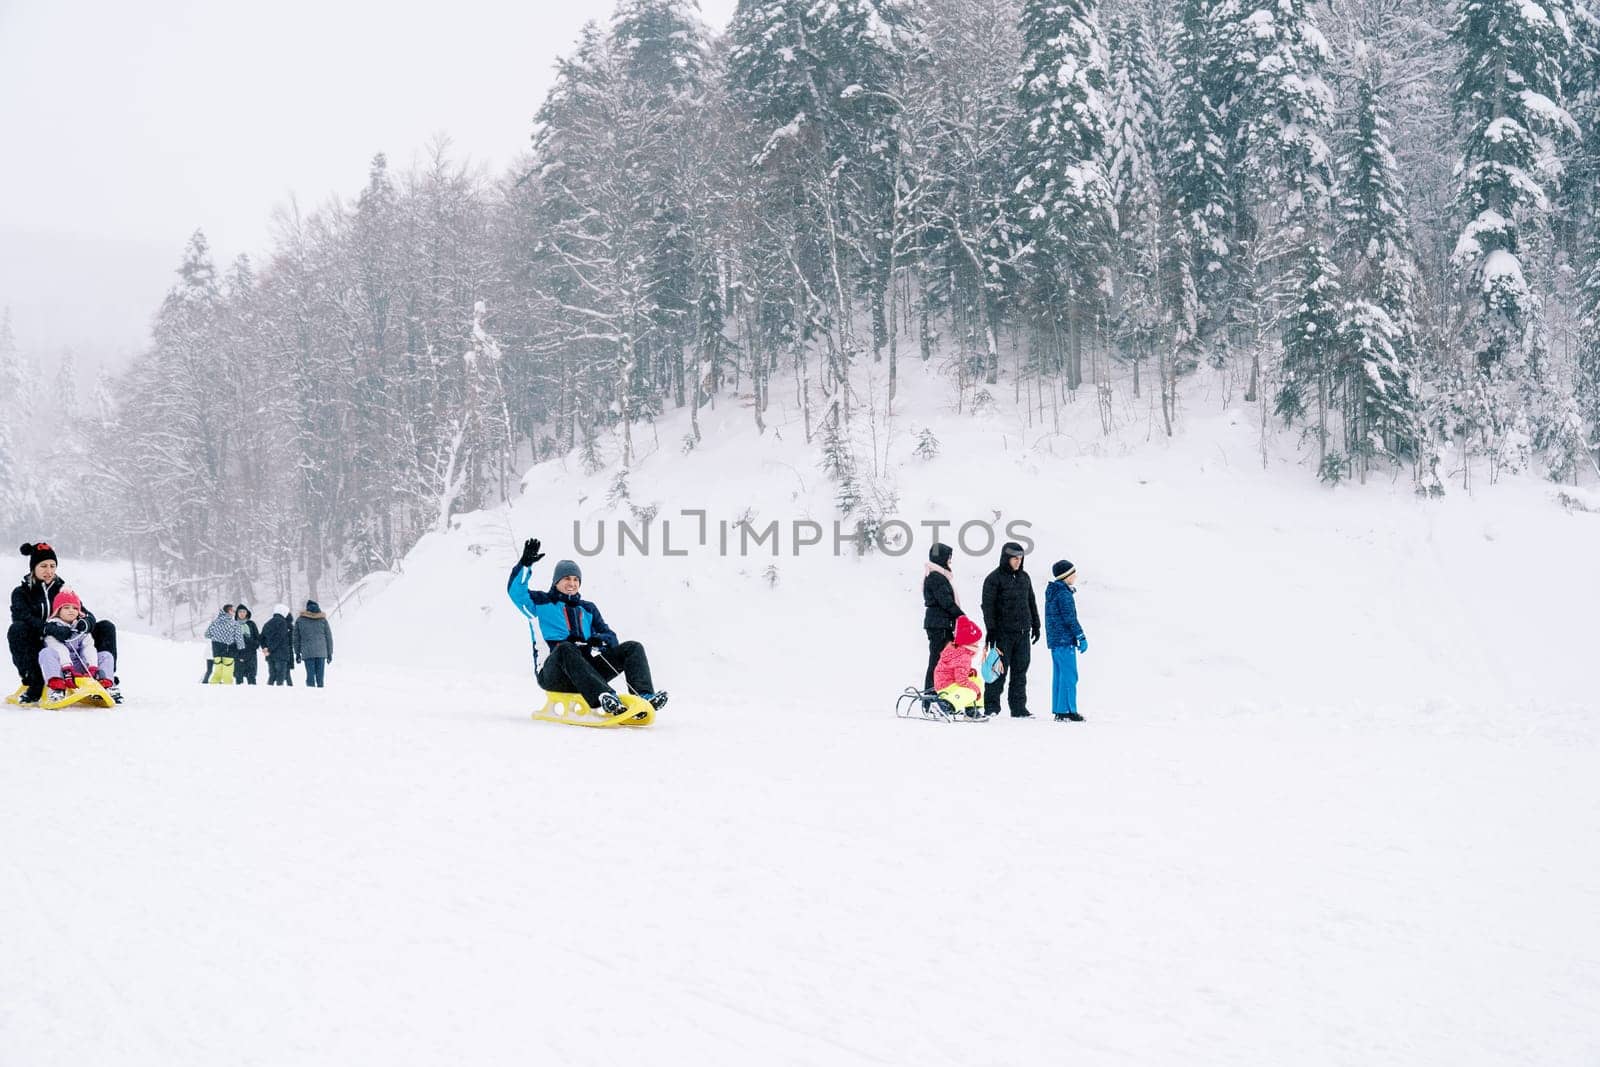 Adults and children sledding down a snowy mountain. High quality photo